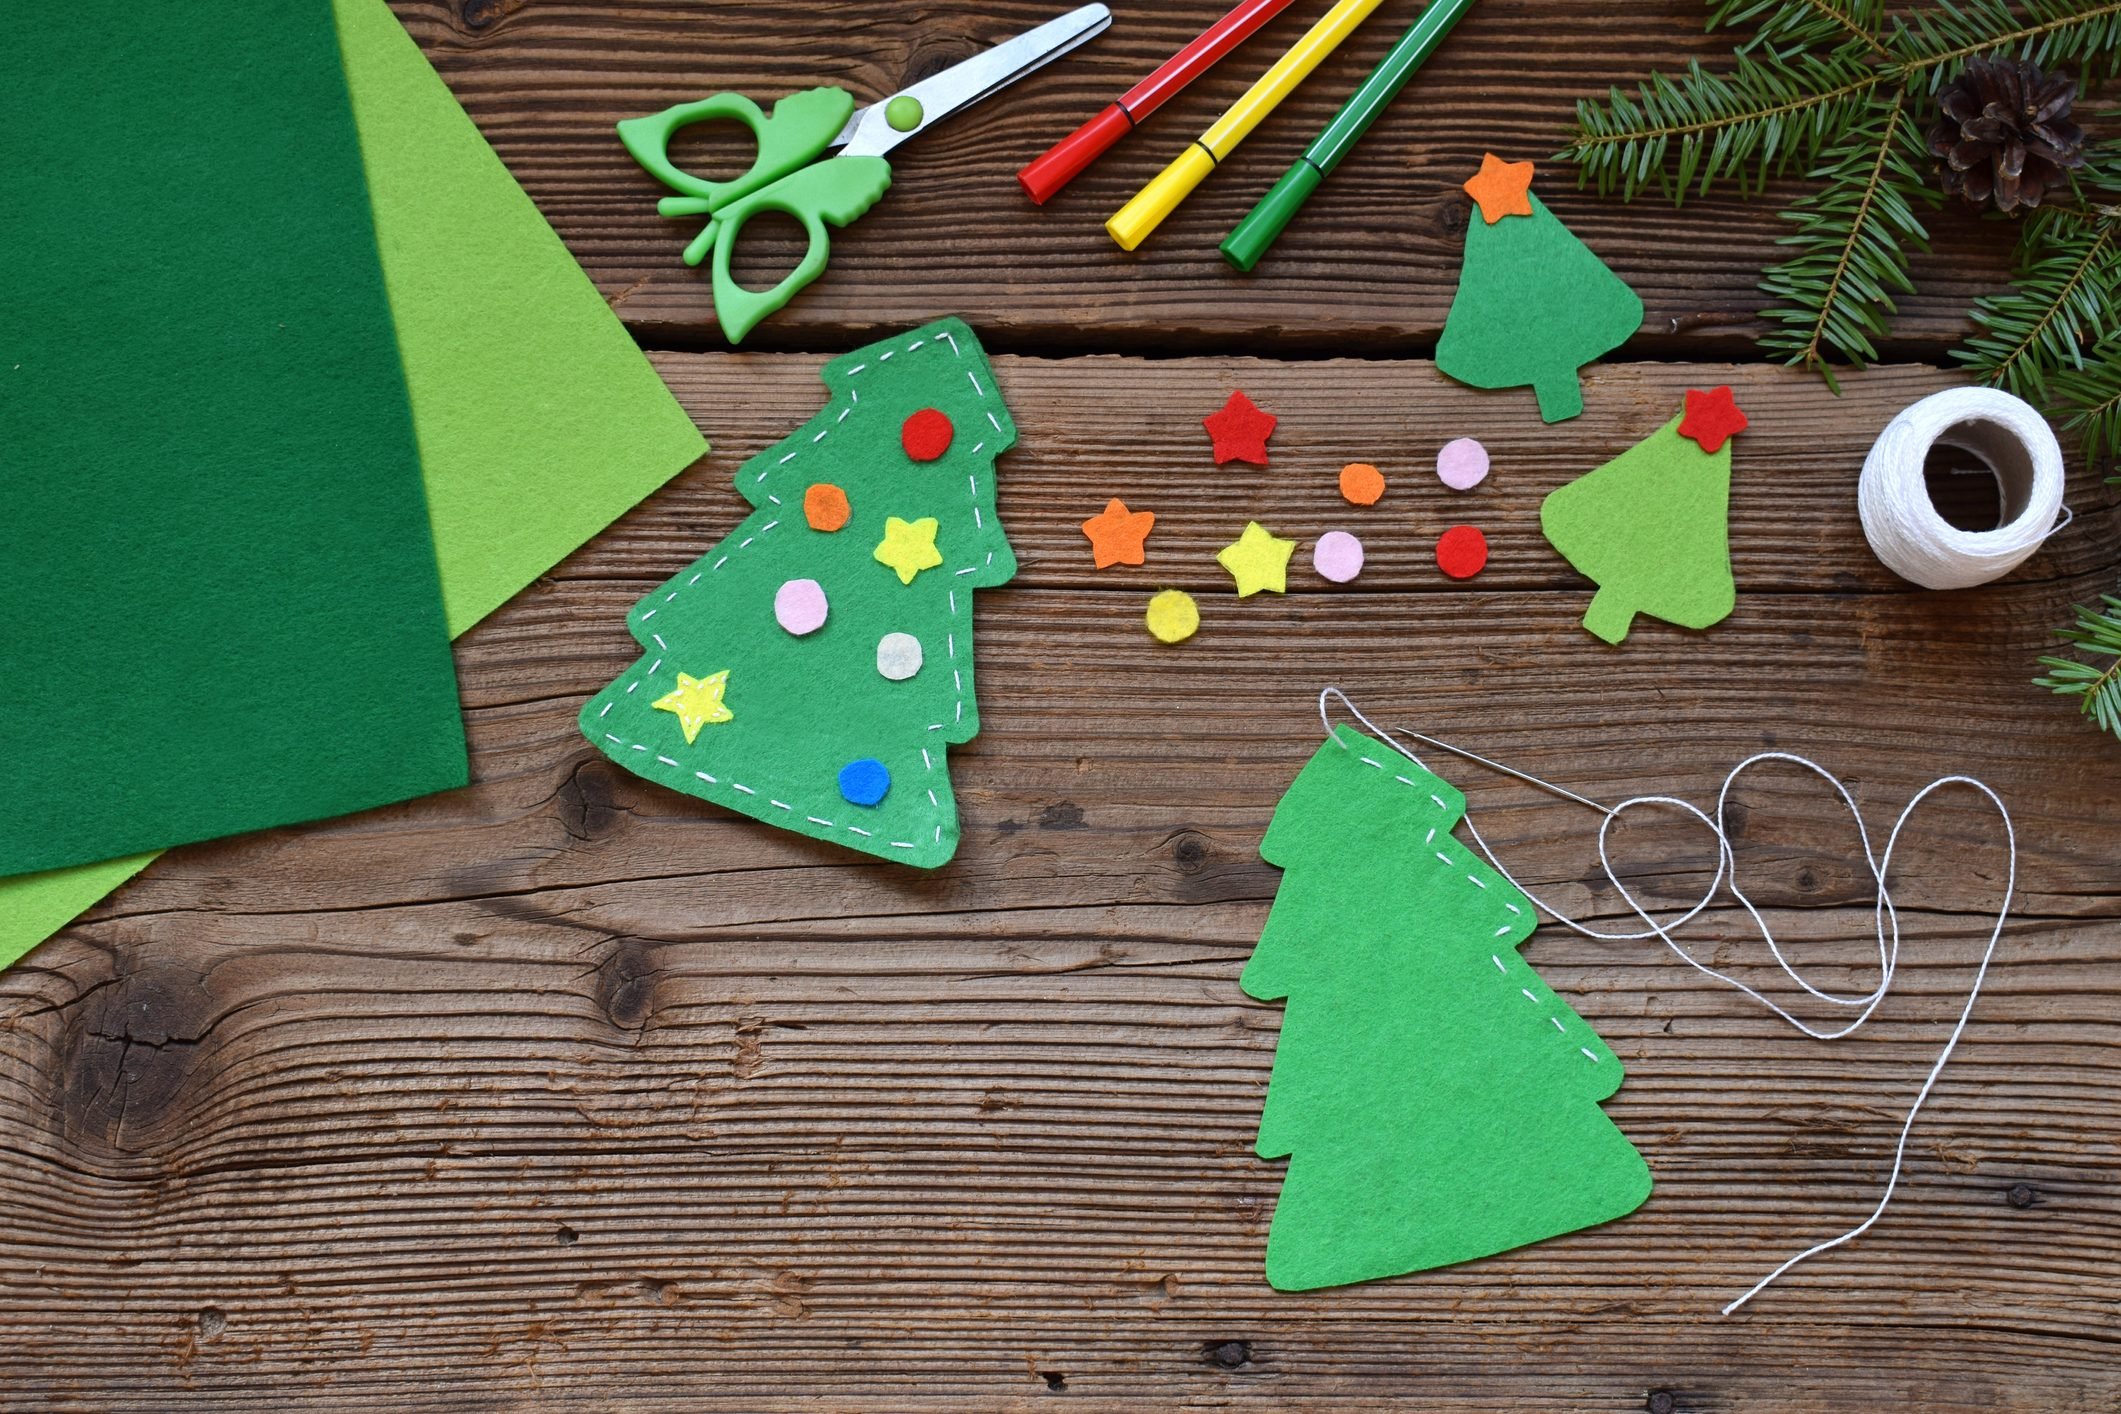 Check Out the Best Christmas Decorations to Make at Home